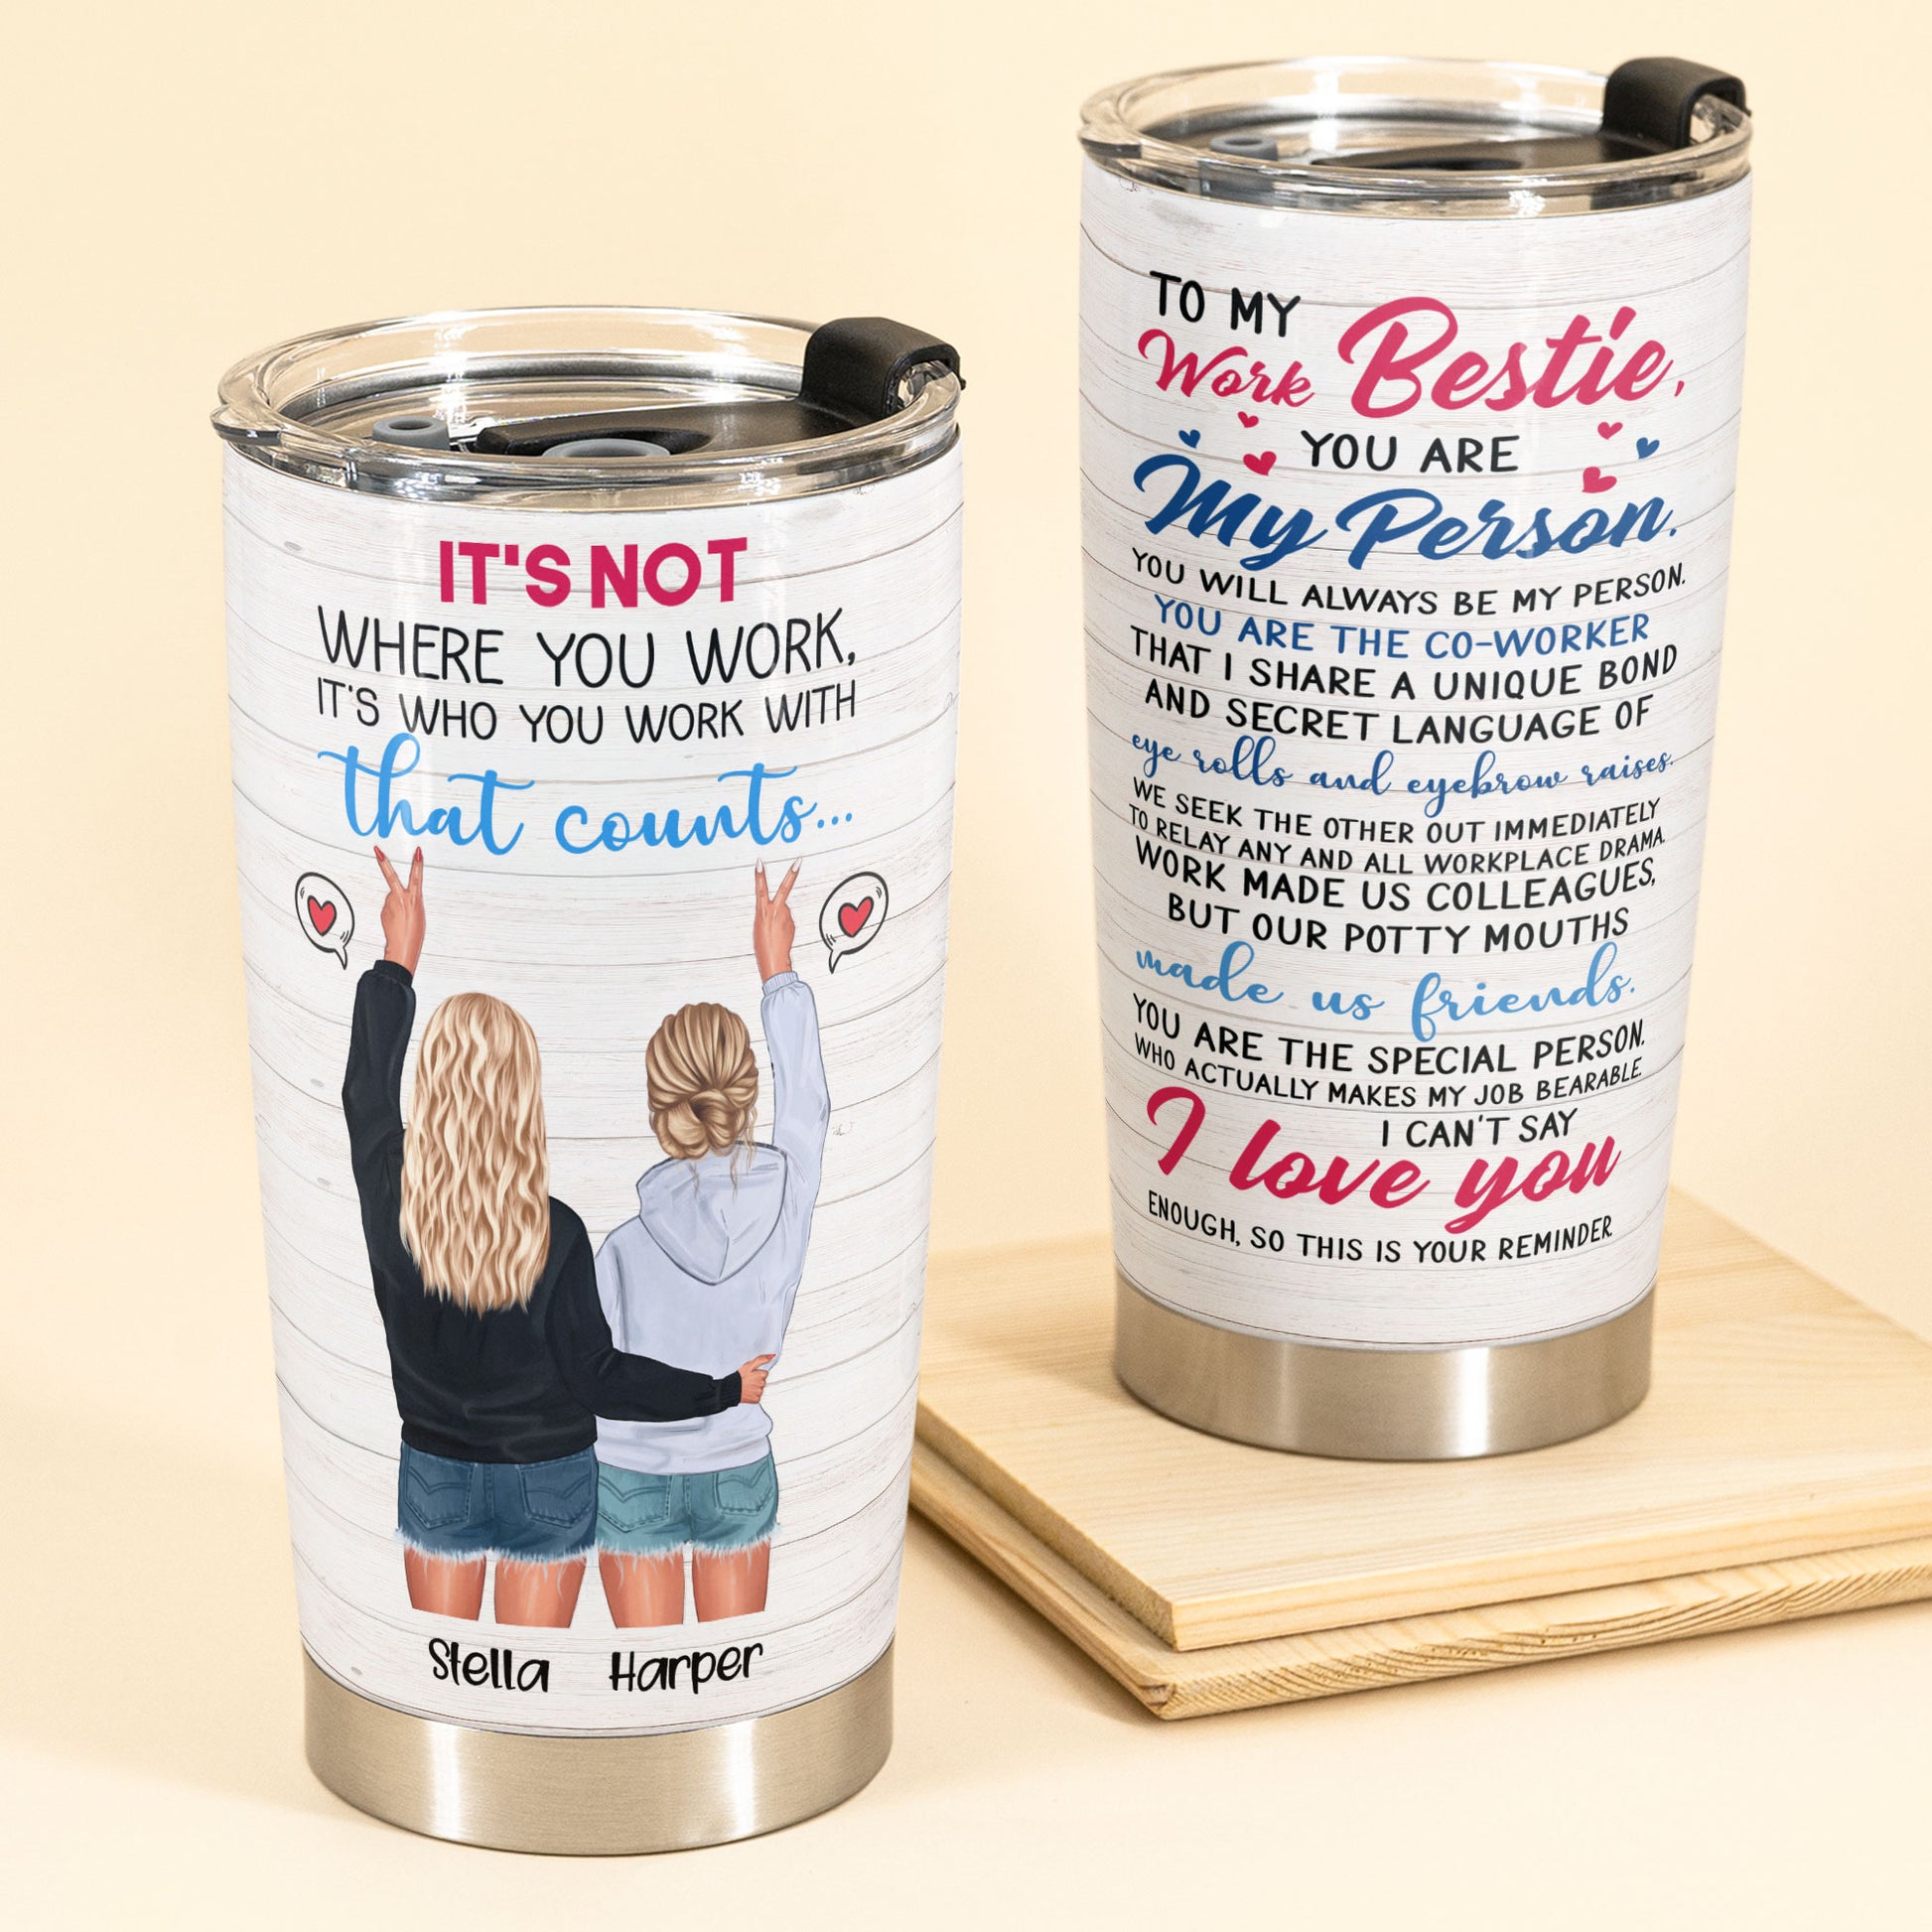 To My Work Bestie - Personalized Tumbler - Gift For Work Besties, Colleagues, Friends, Best Friends